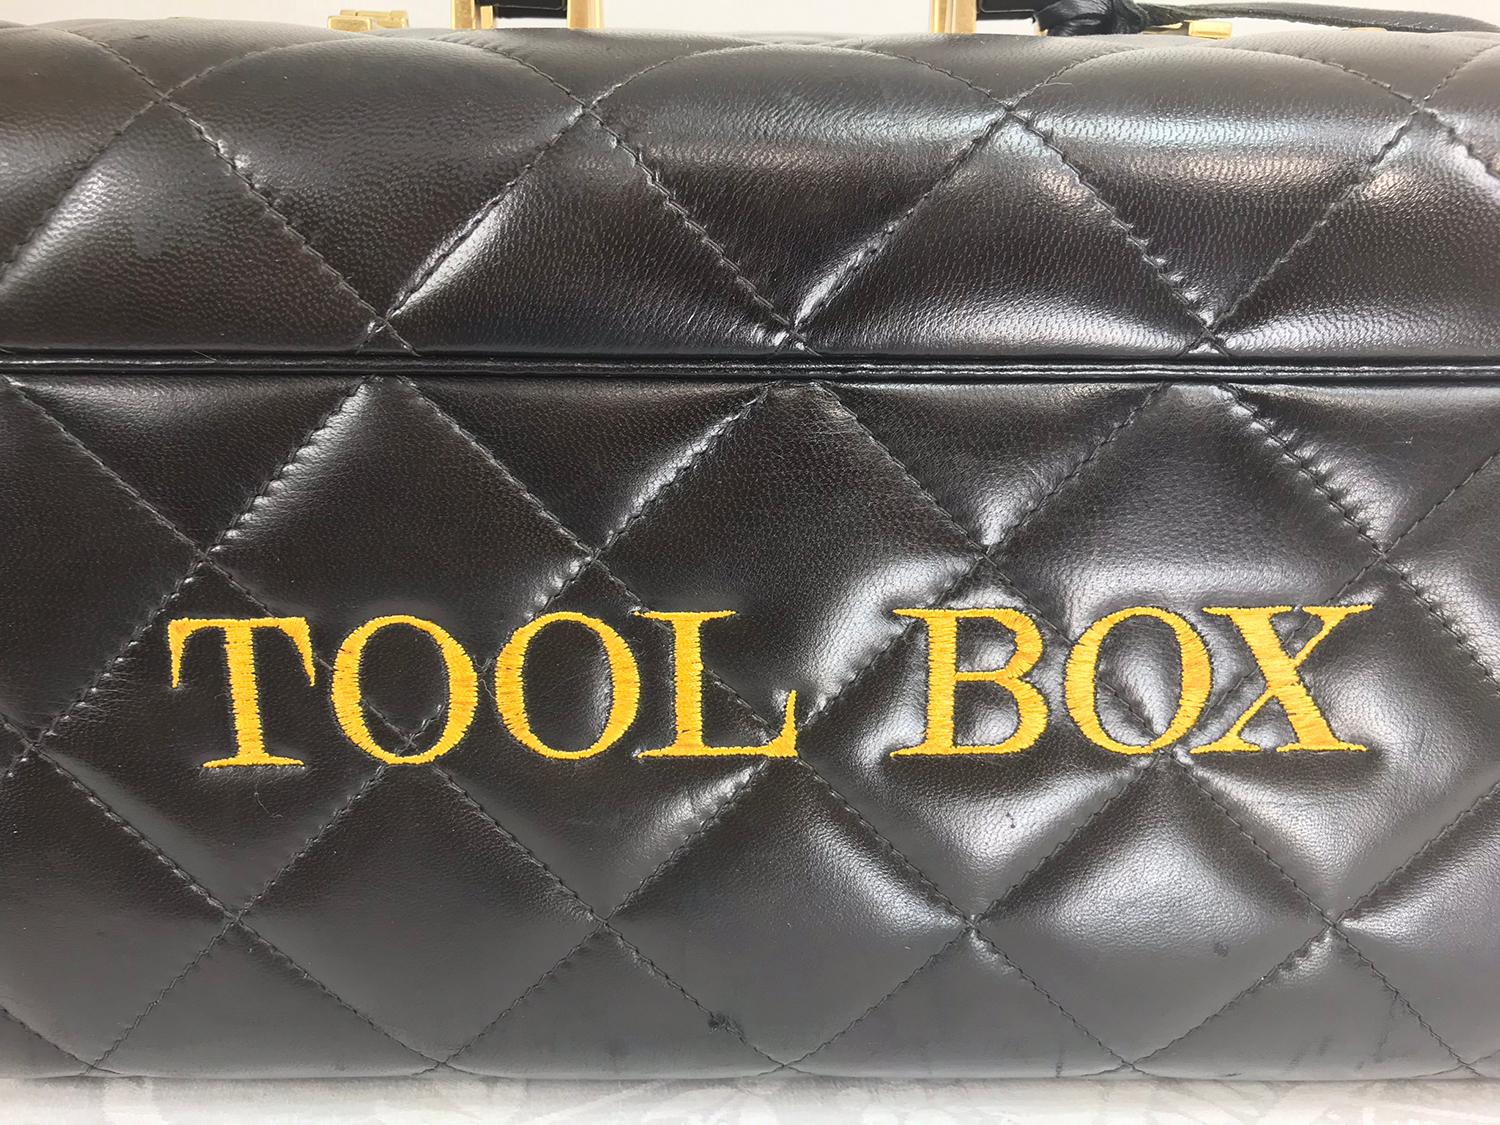 Moschino tool box, very rare train case, Red Wall from the 1980s, pun intended, thank you Franco Moschino.  Room for all the tools you may need to make yourself beautiful.  This beautiful and, very rare, dark chocolate brown quilted leather train